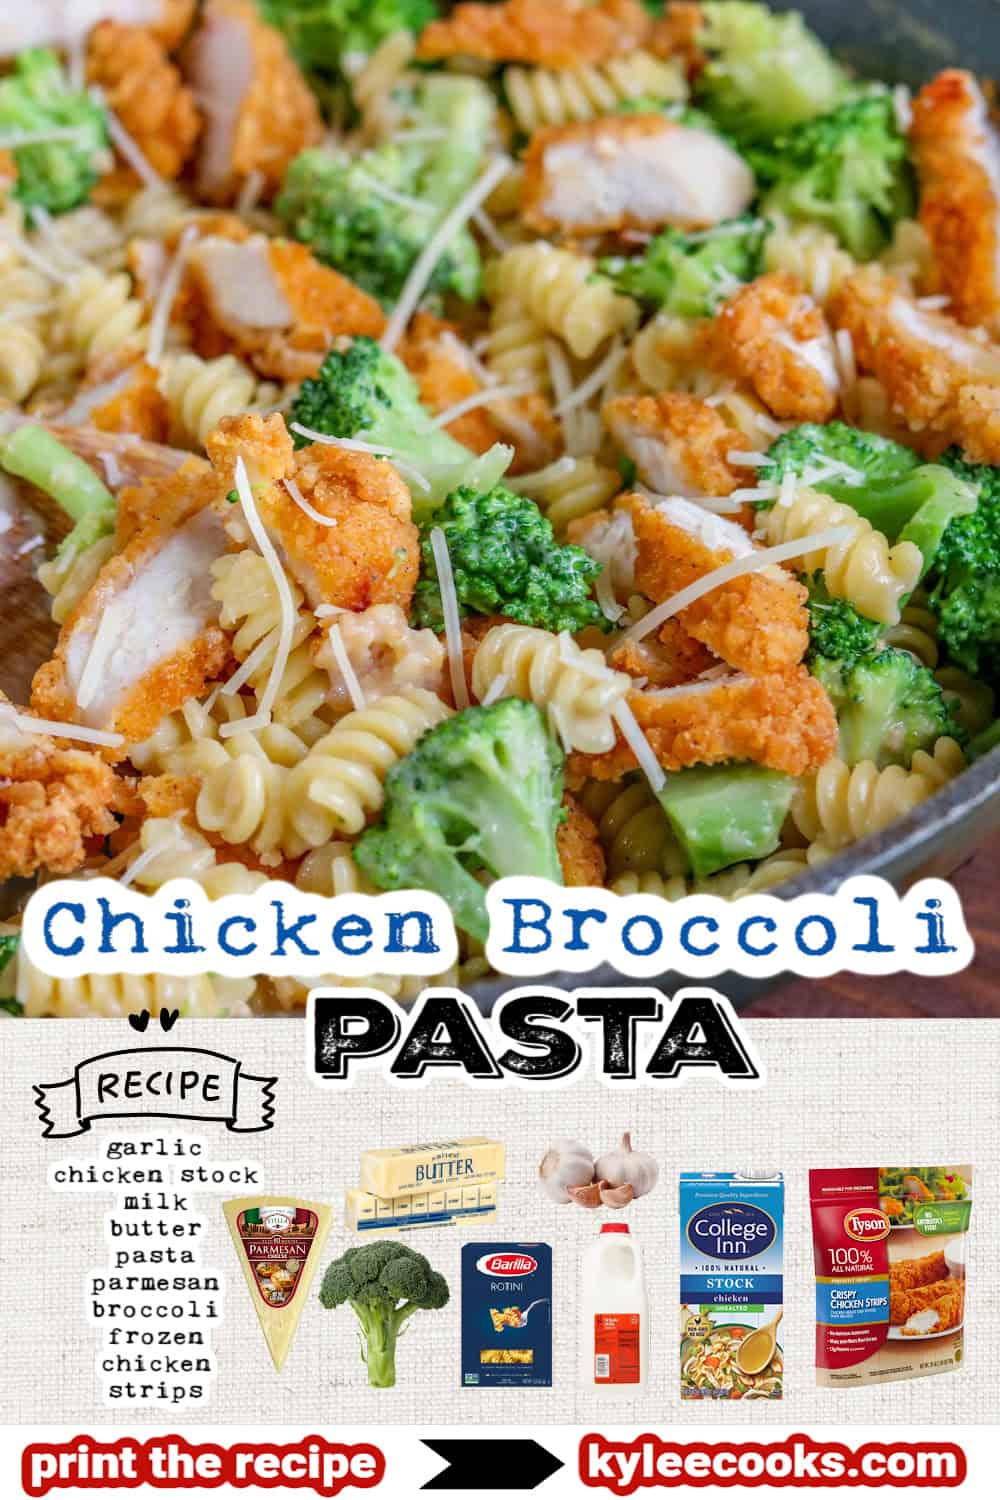 chicken broccoli pasta with recipe ingredients overlaid in a collage